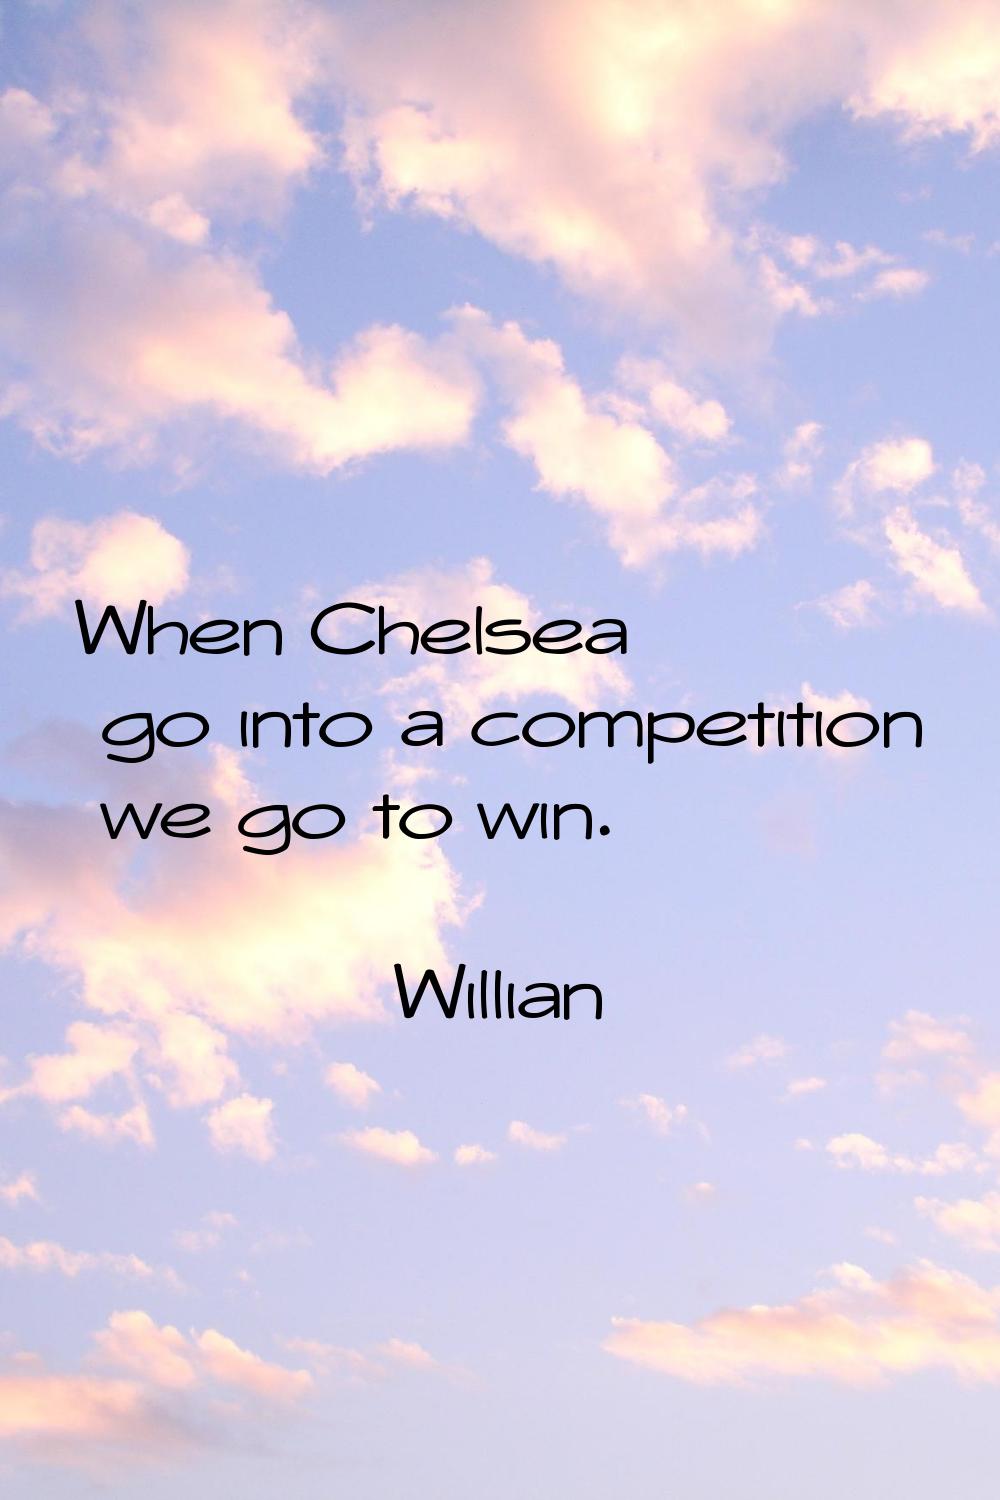 When Chelsea go into a competition we go to win.